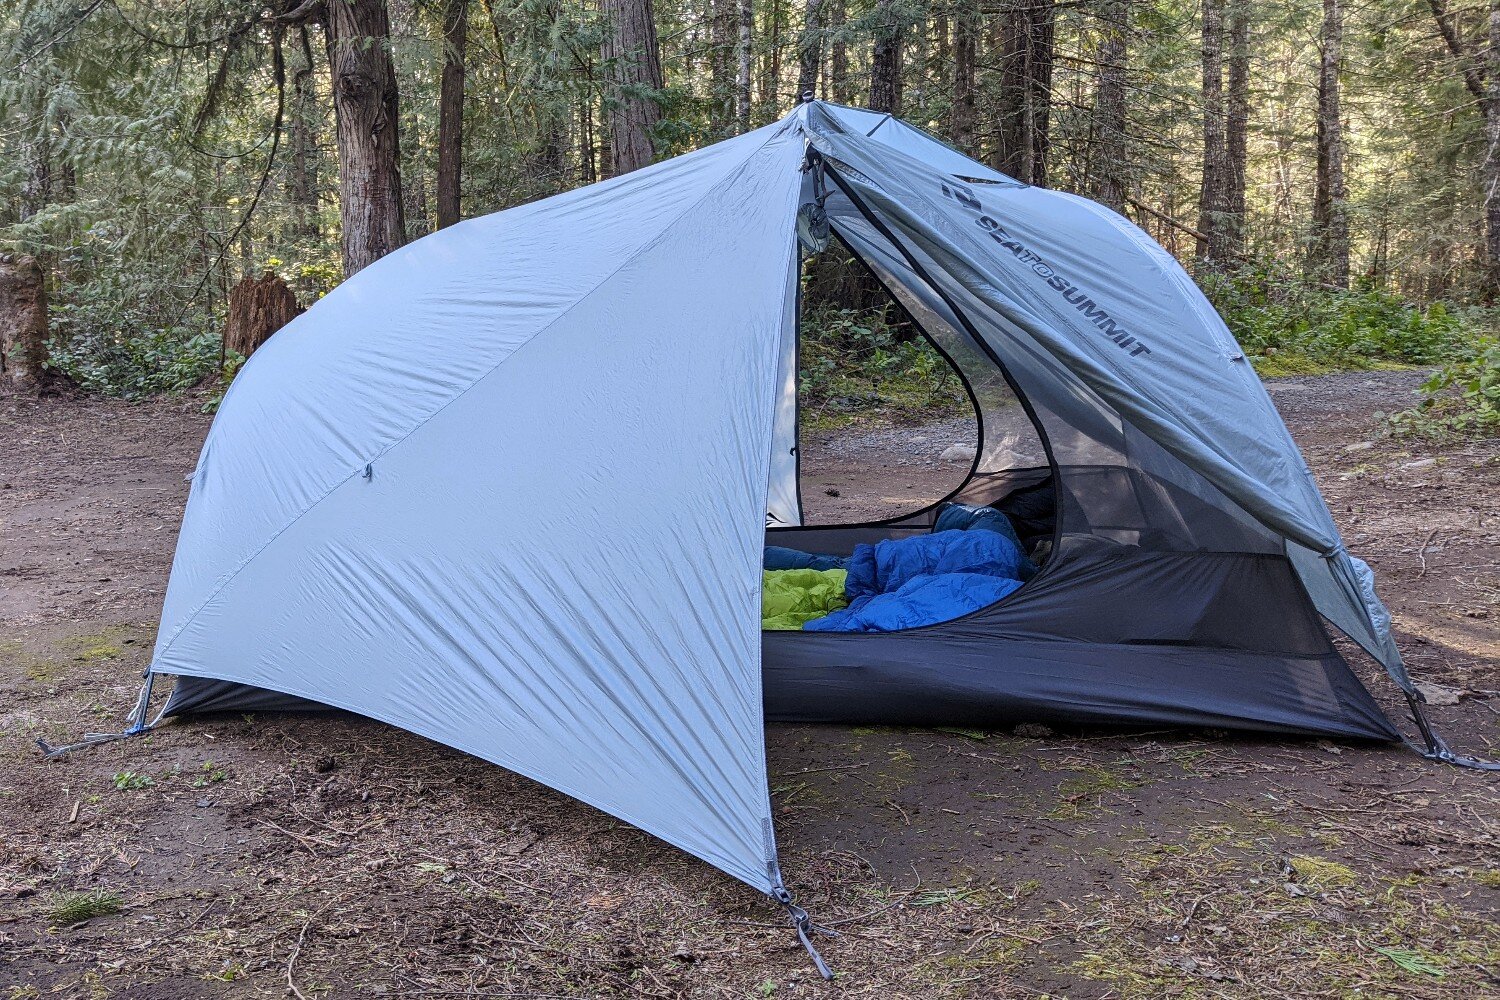  Either flap on the rainfly can be staked out depending on how you like to use your tent. 